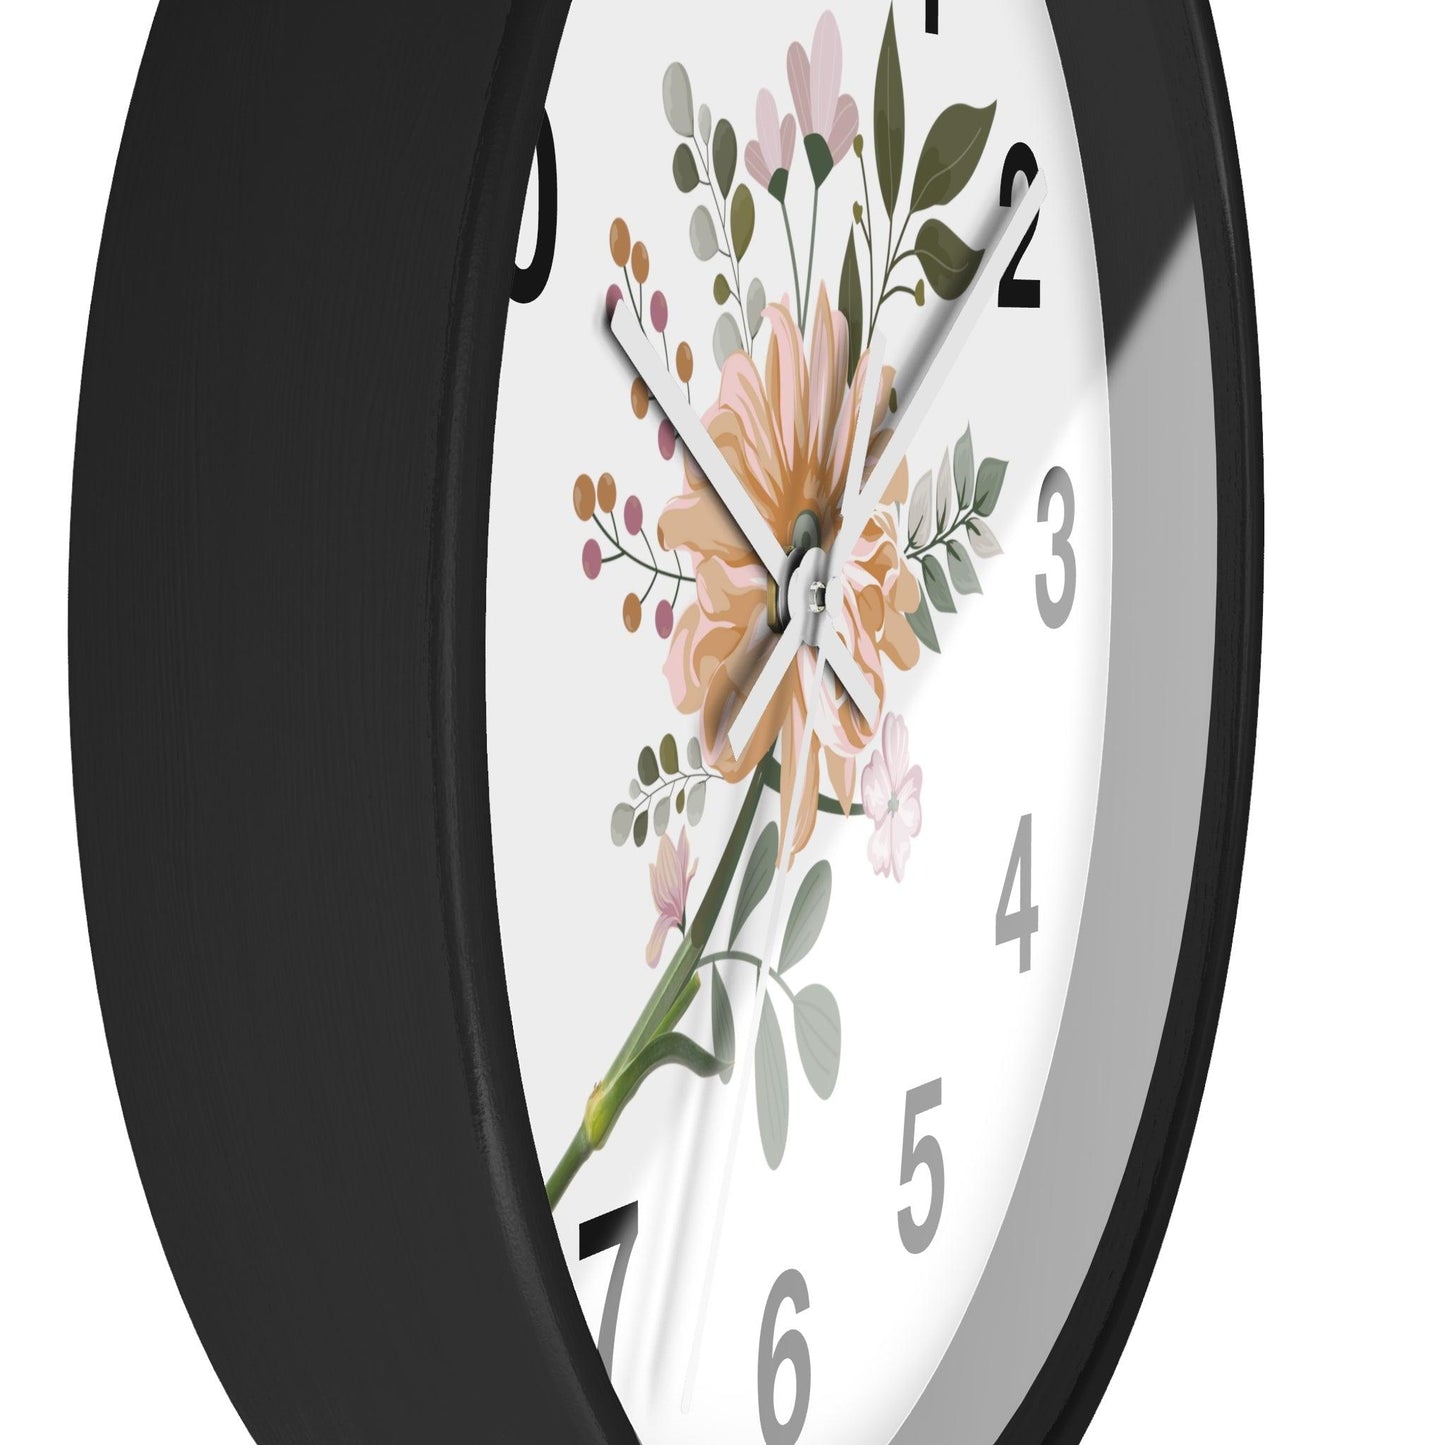 Flower Wall Clock Floral Wall Clock Home Decor Gift House Warming Gift - Mom Gift Unique Gift Farmhouse Clocks For Wall Living Room Bedroom - Giftsmojo